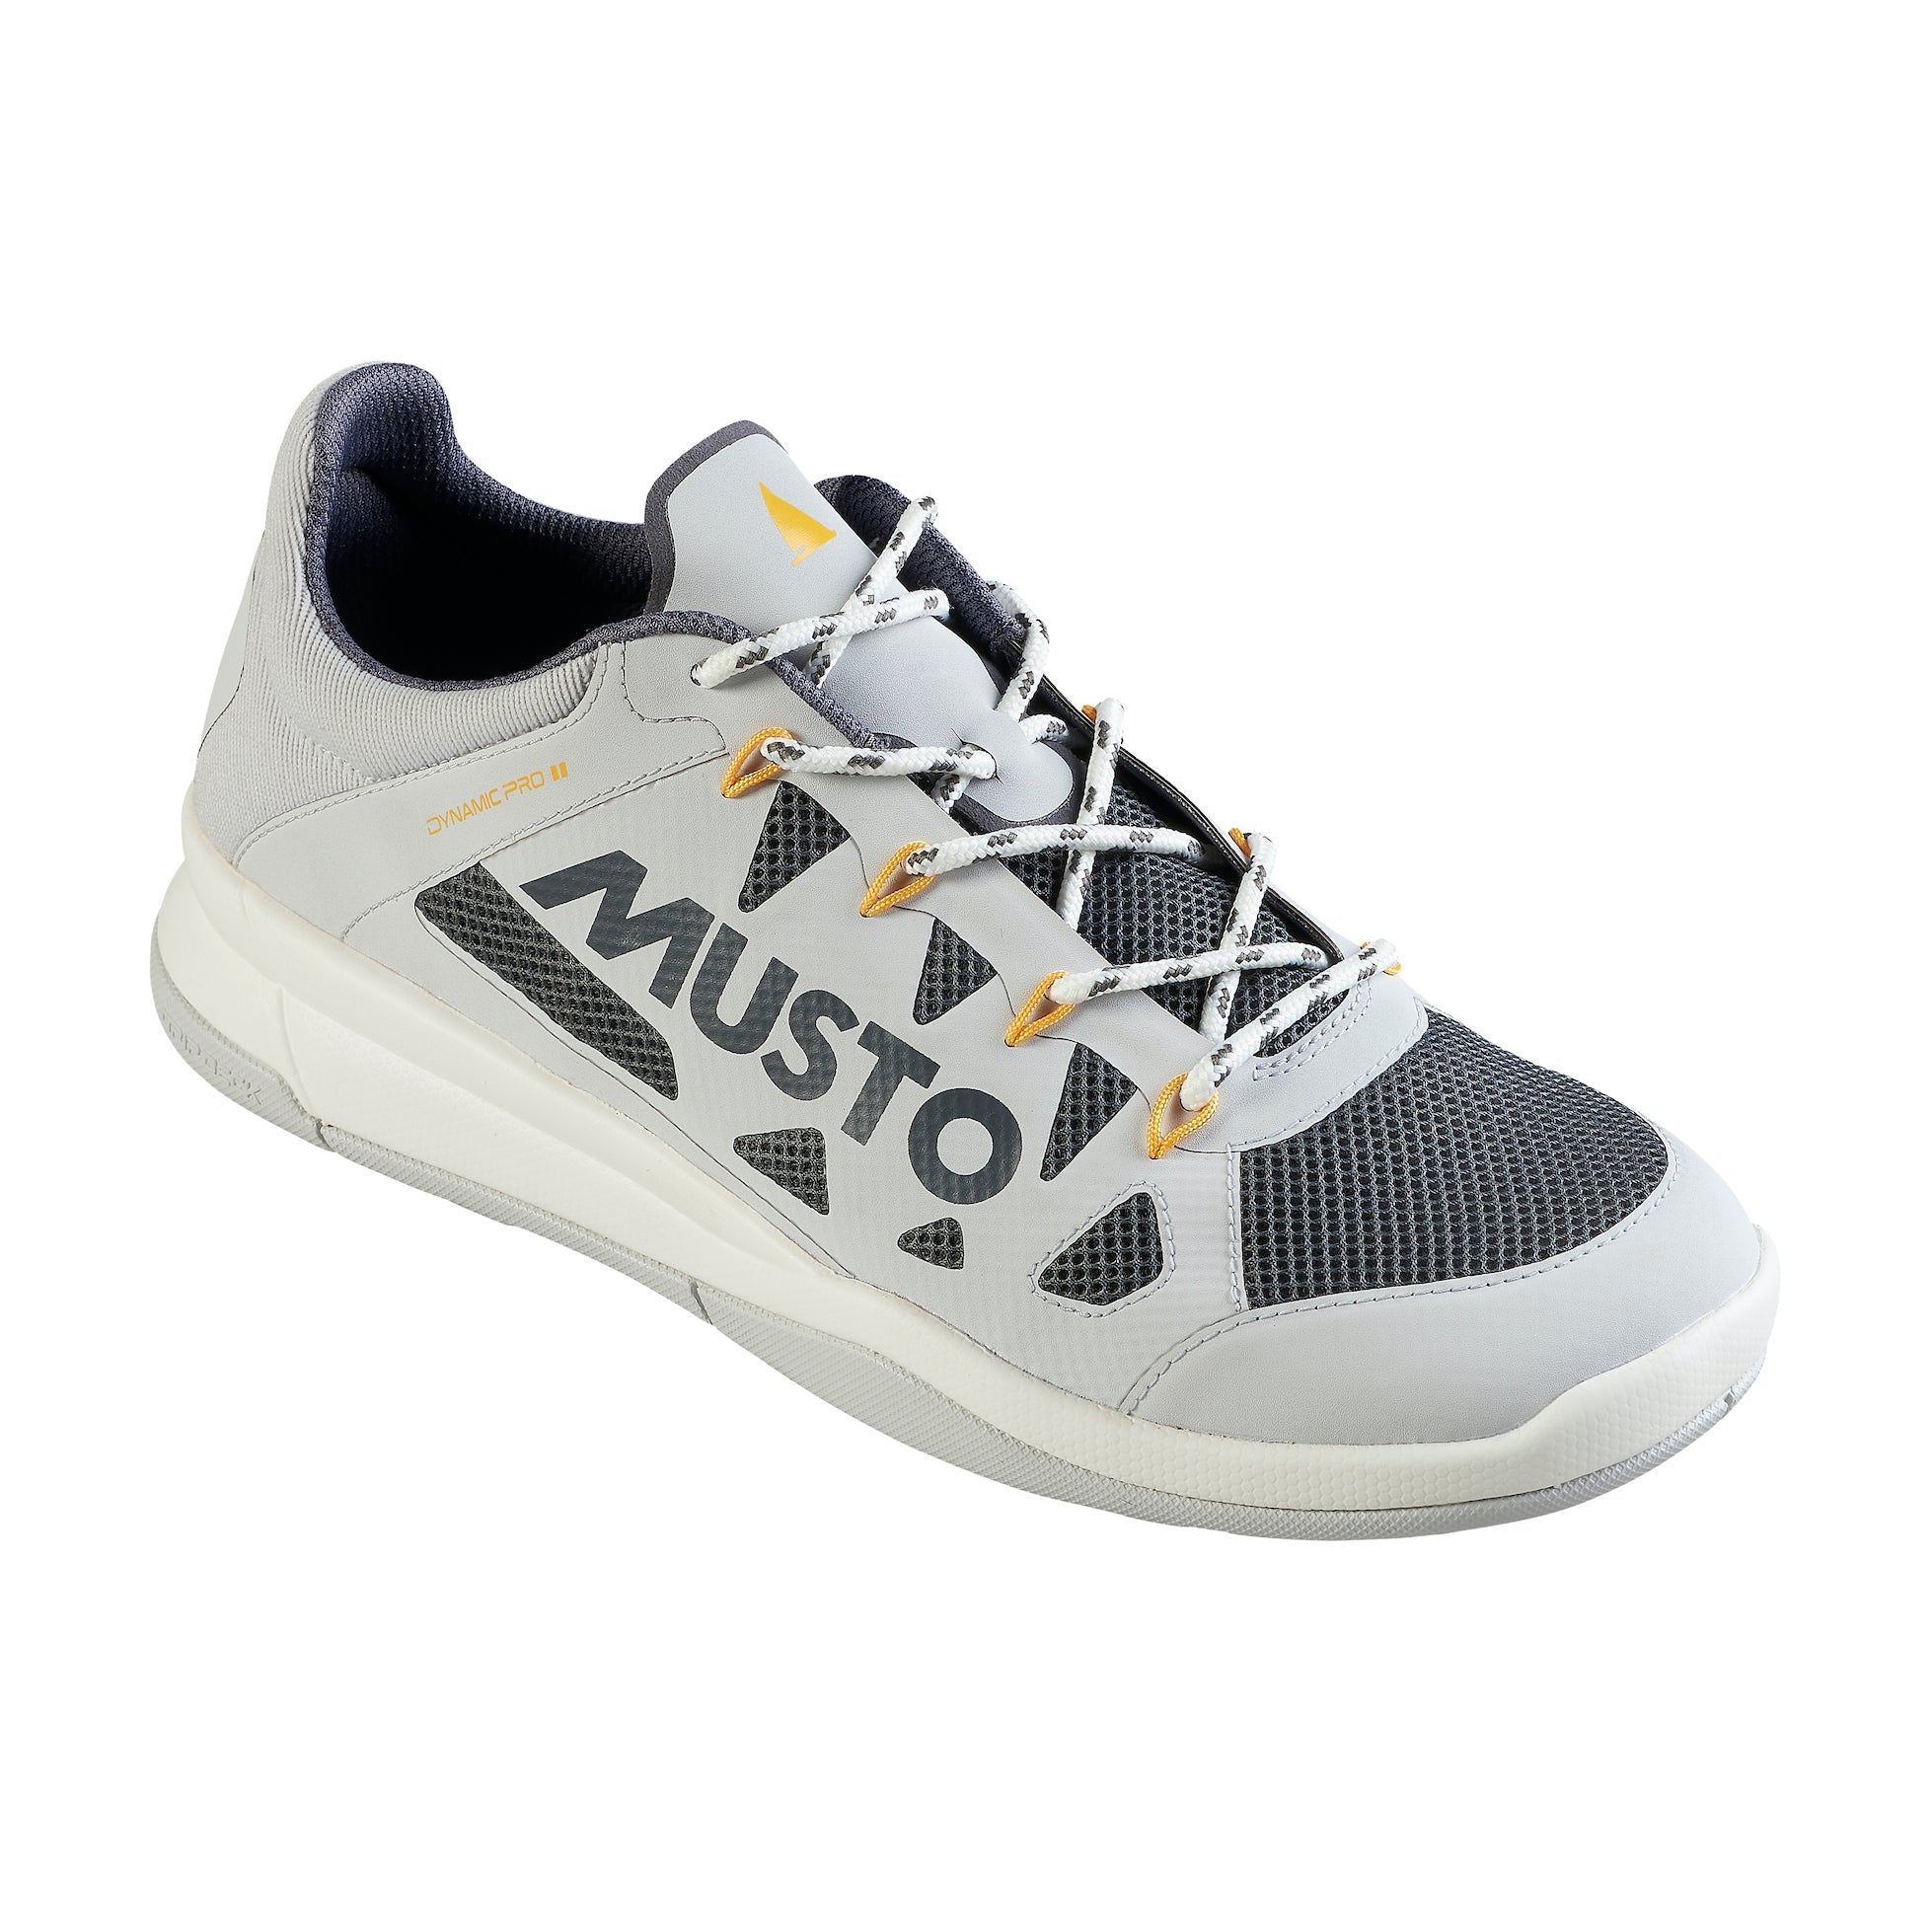 MUSTO DYNAMIC PRO II SHOES (full and half sizes)